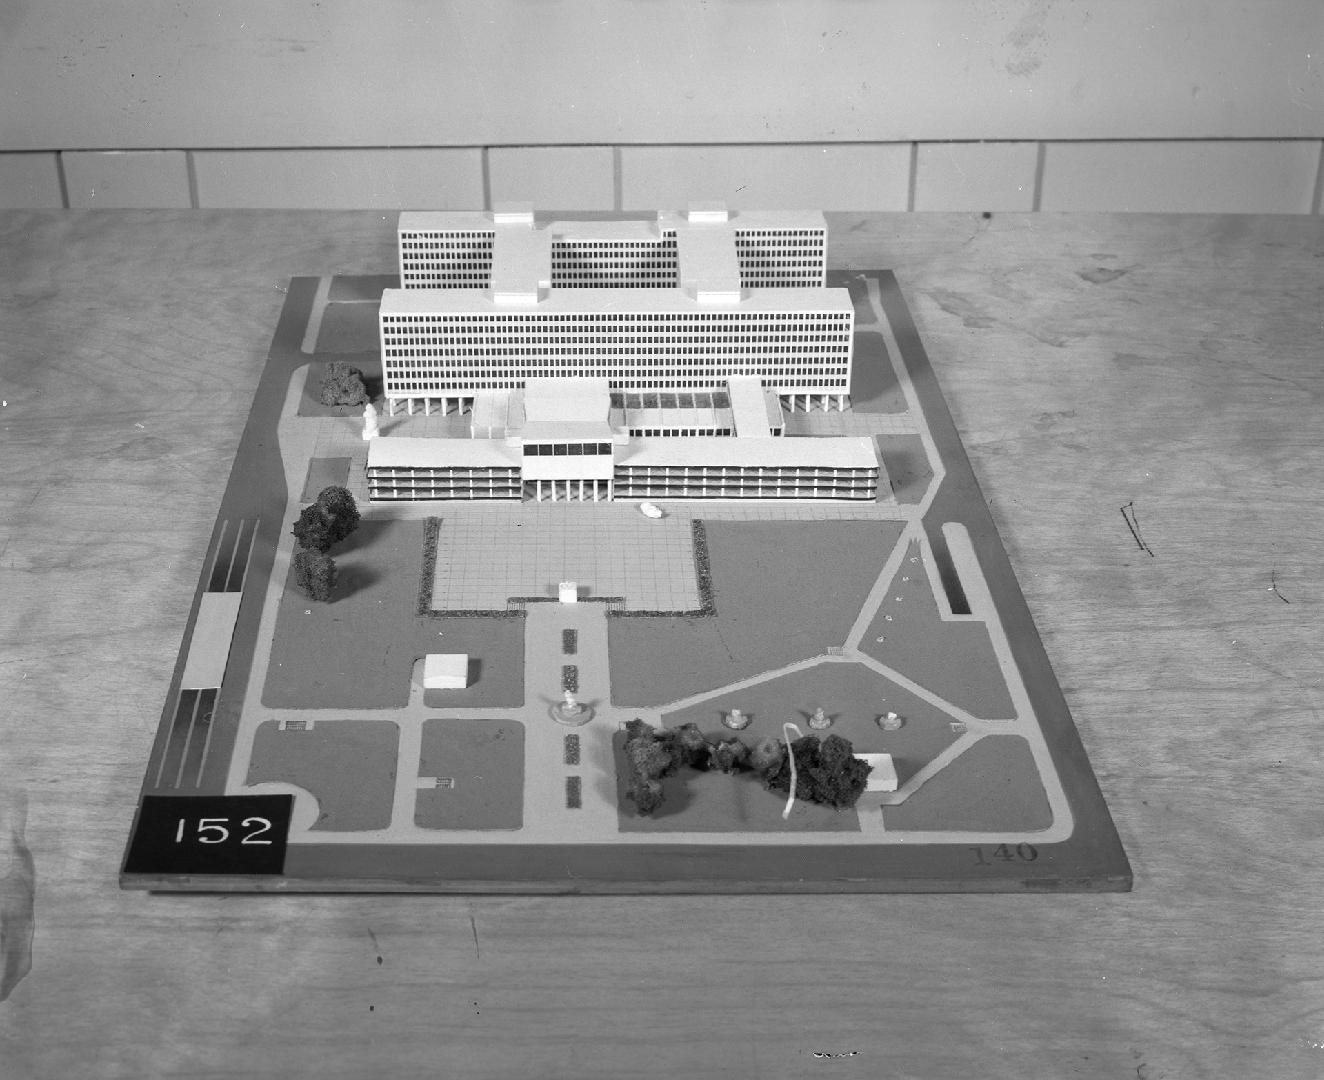 W. Leslie Jones entry, City Hall and Square Competition, Toronto, 1958, architectural model